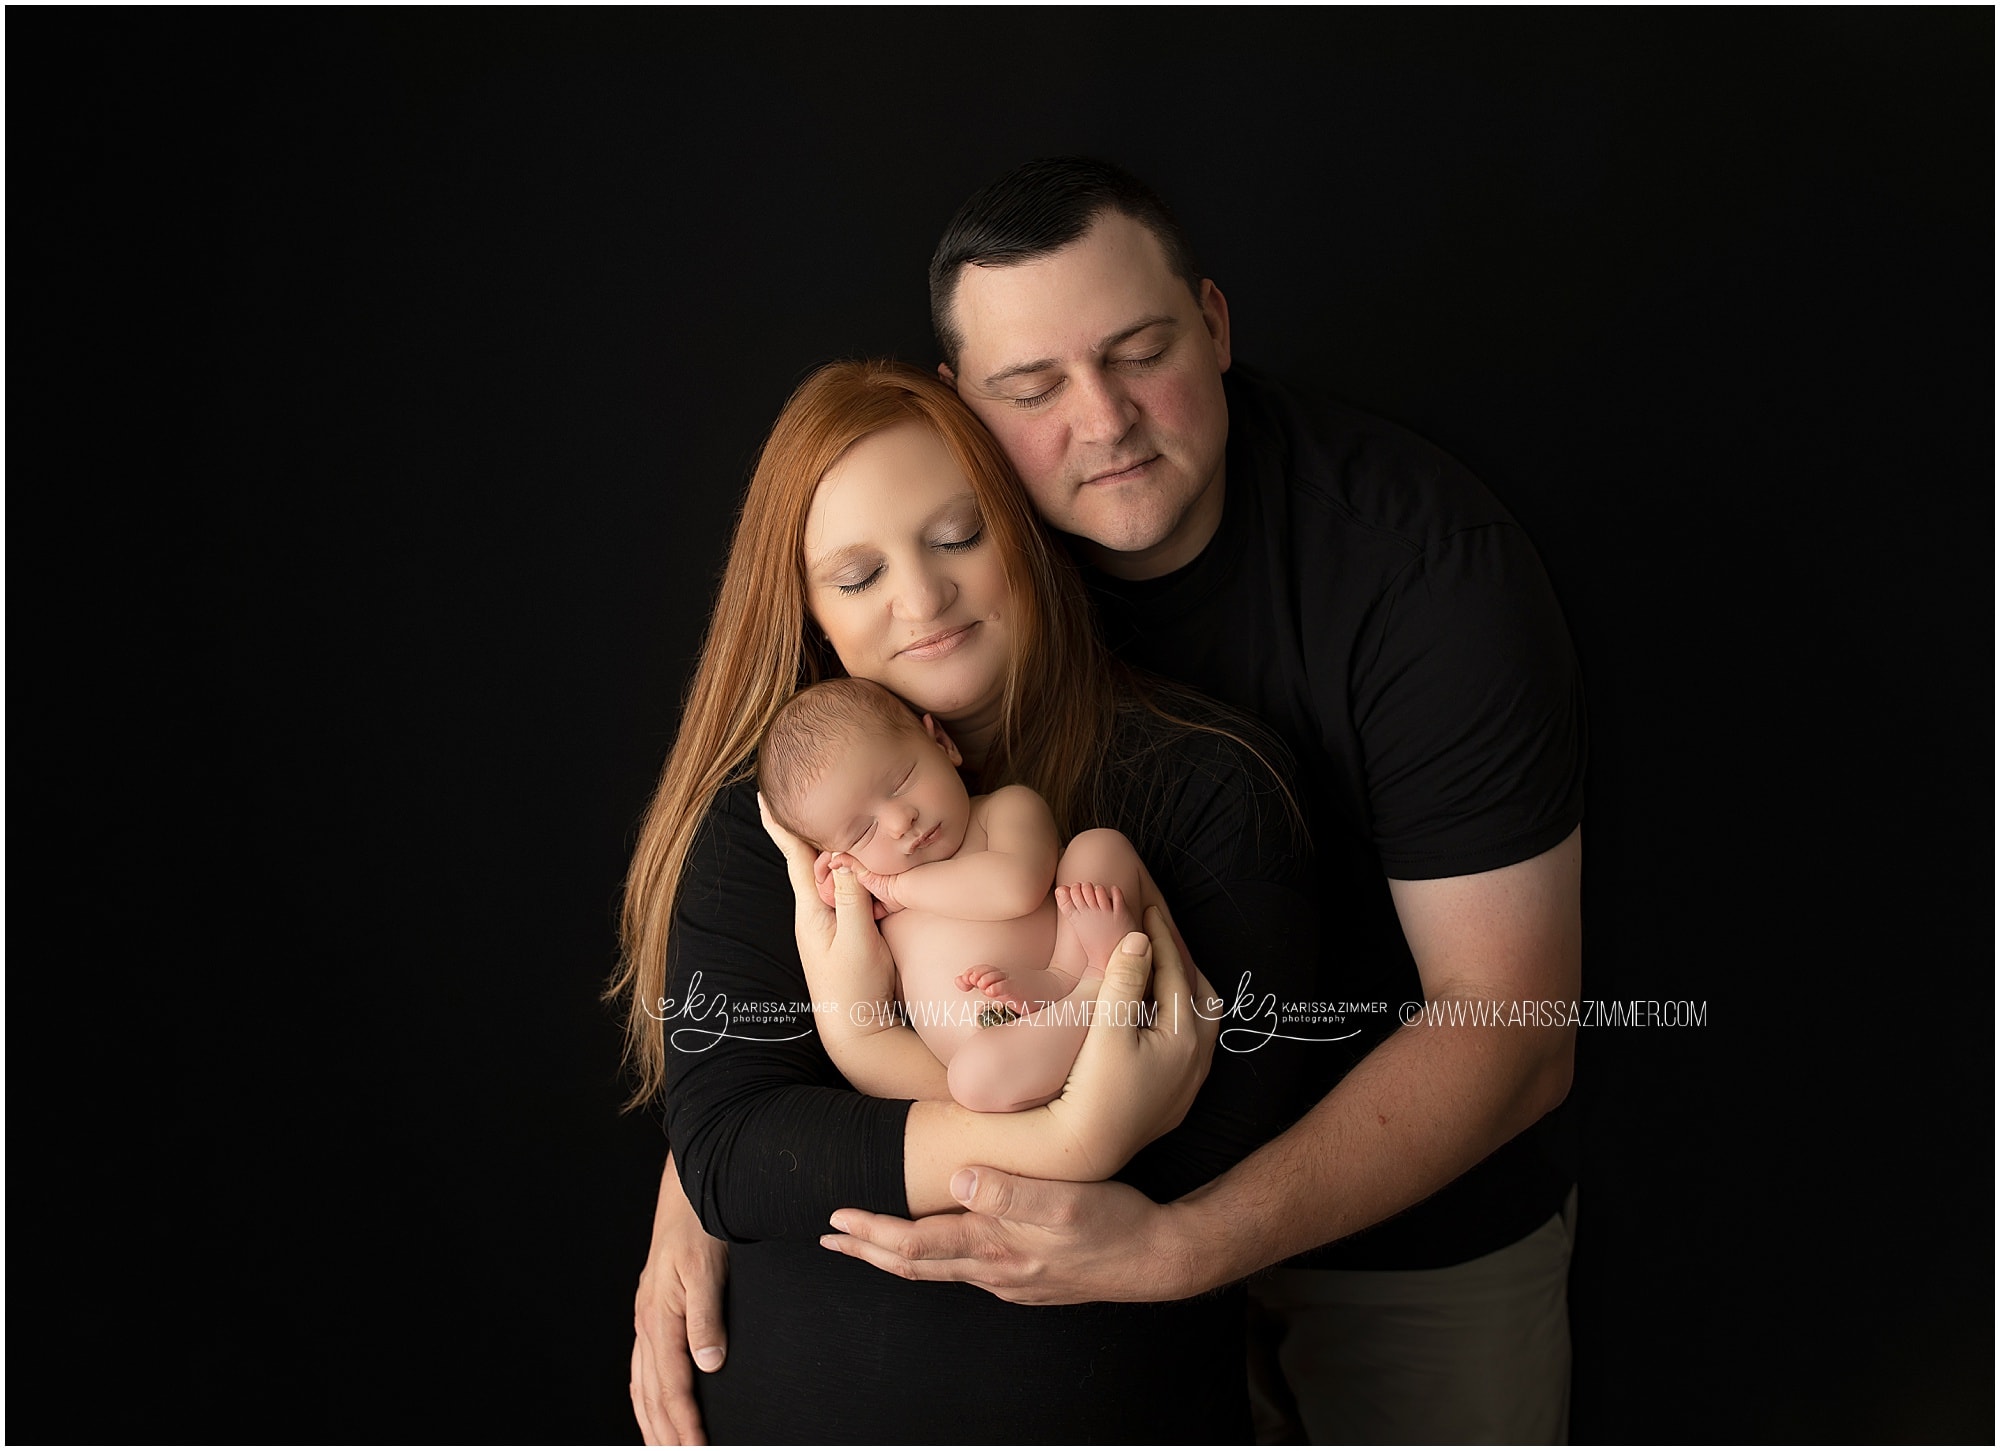 New parents pose with their newborn baby during photoshoot with Karissa Zimmer Photography